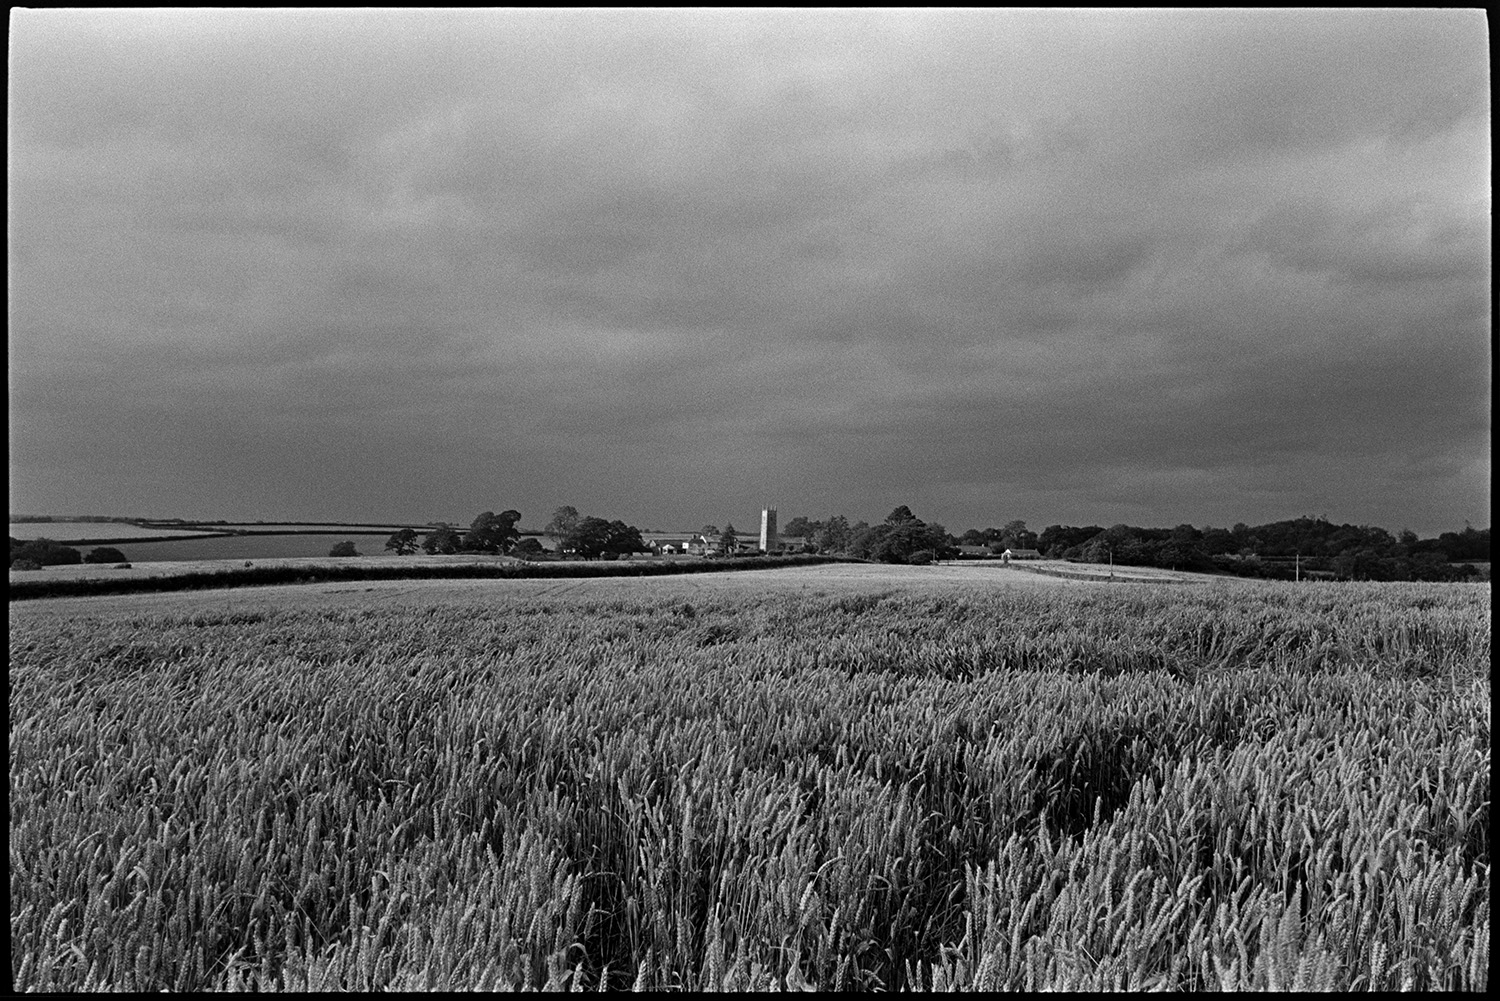 Combine harvester at work, fields of wheat. Church tower in distance.
[A field of wheat at Brimblecombe near Dolton, with a church tower and trees in the background, and a cloudy sky above.]